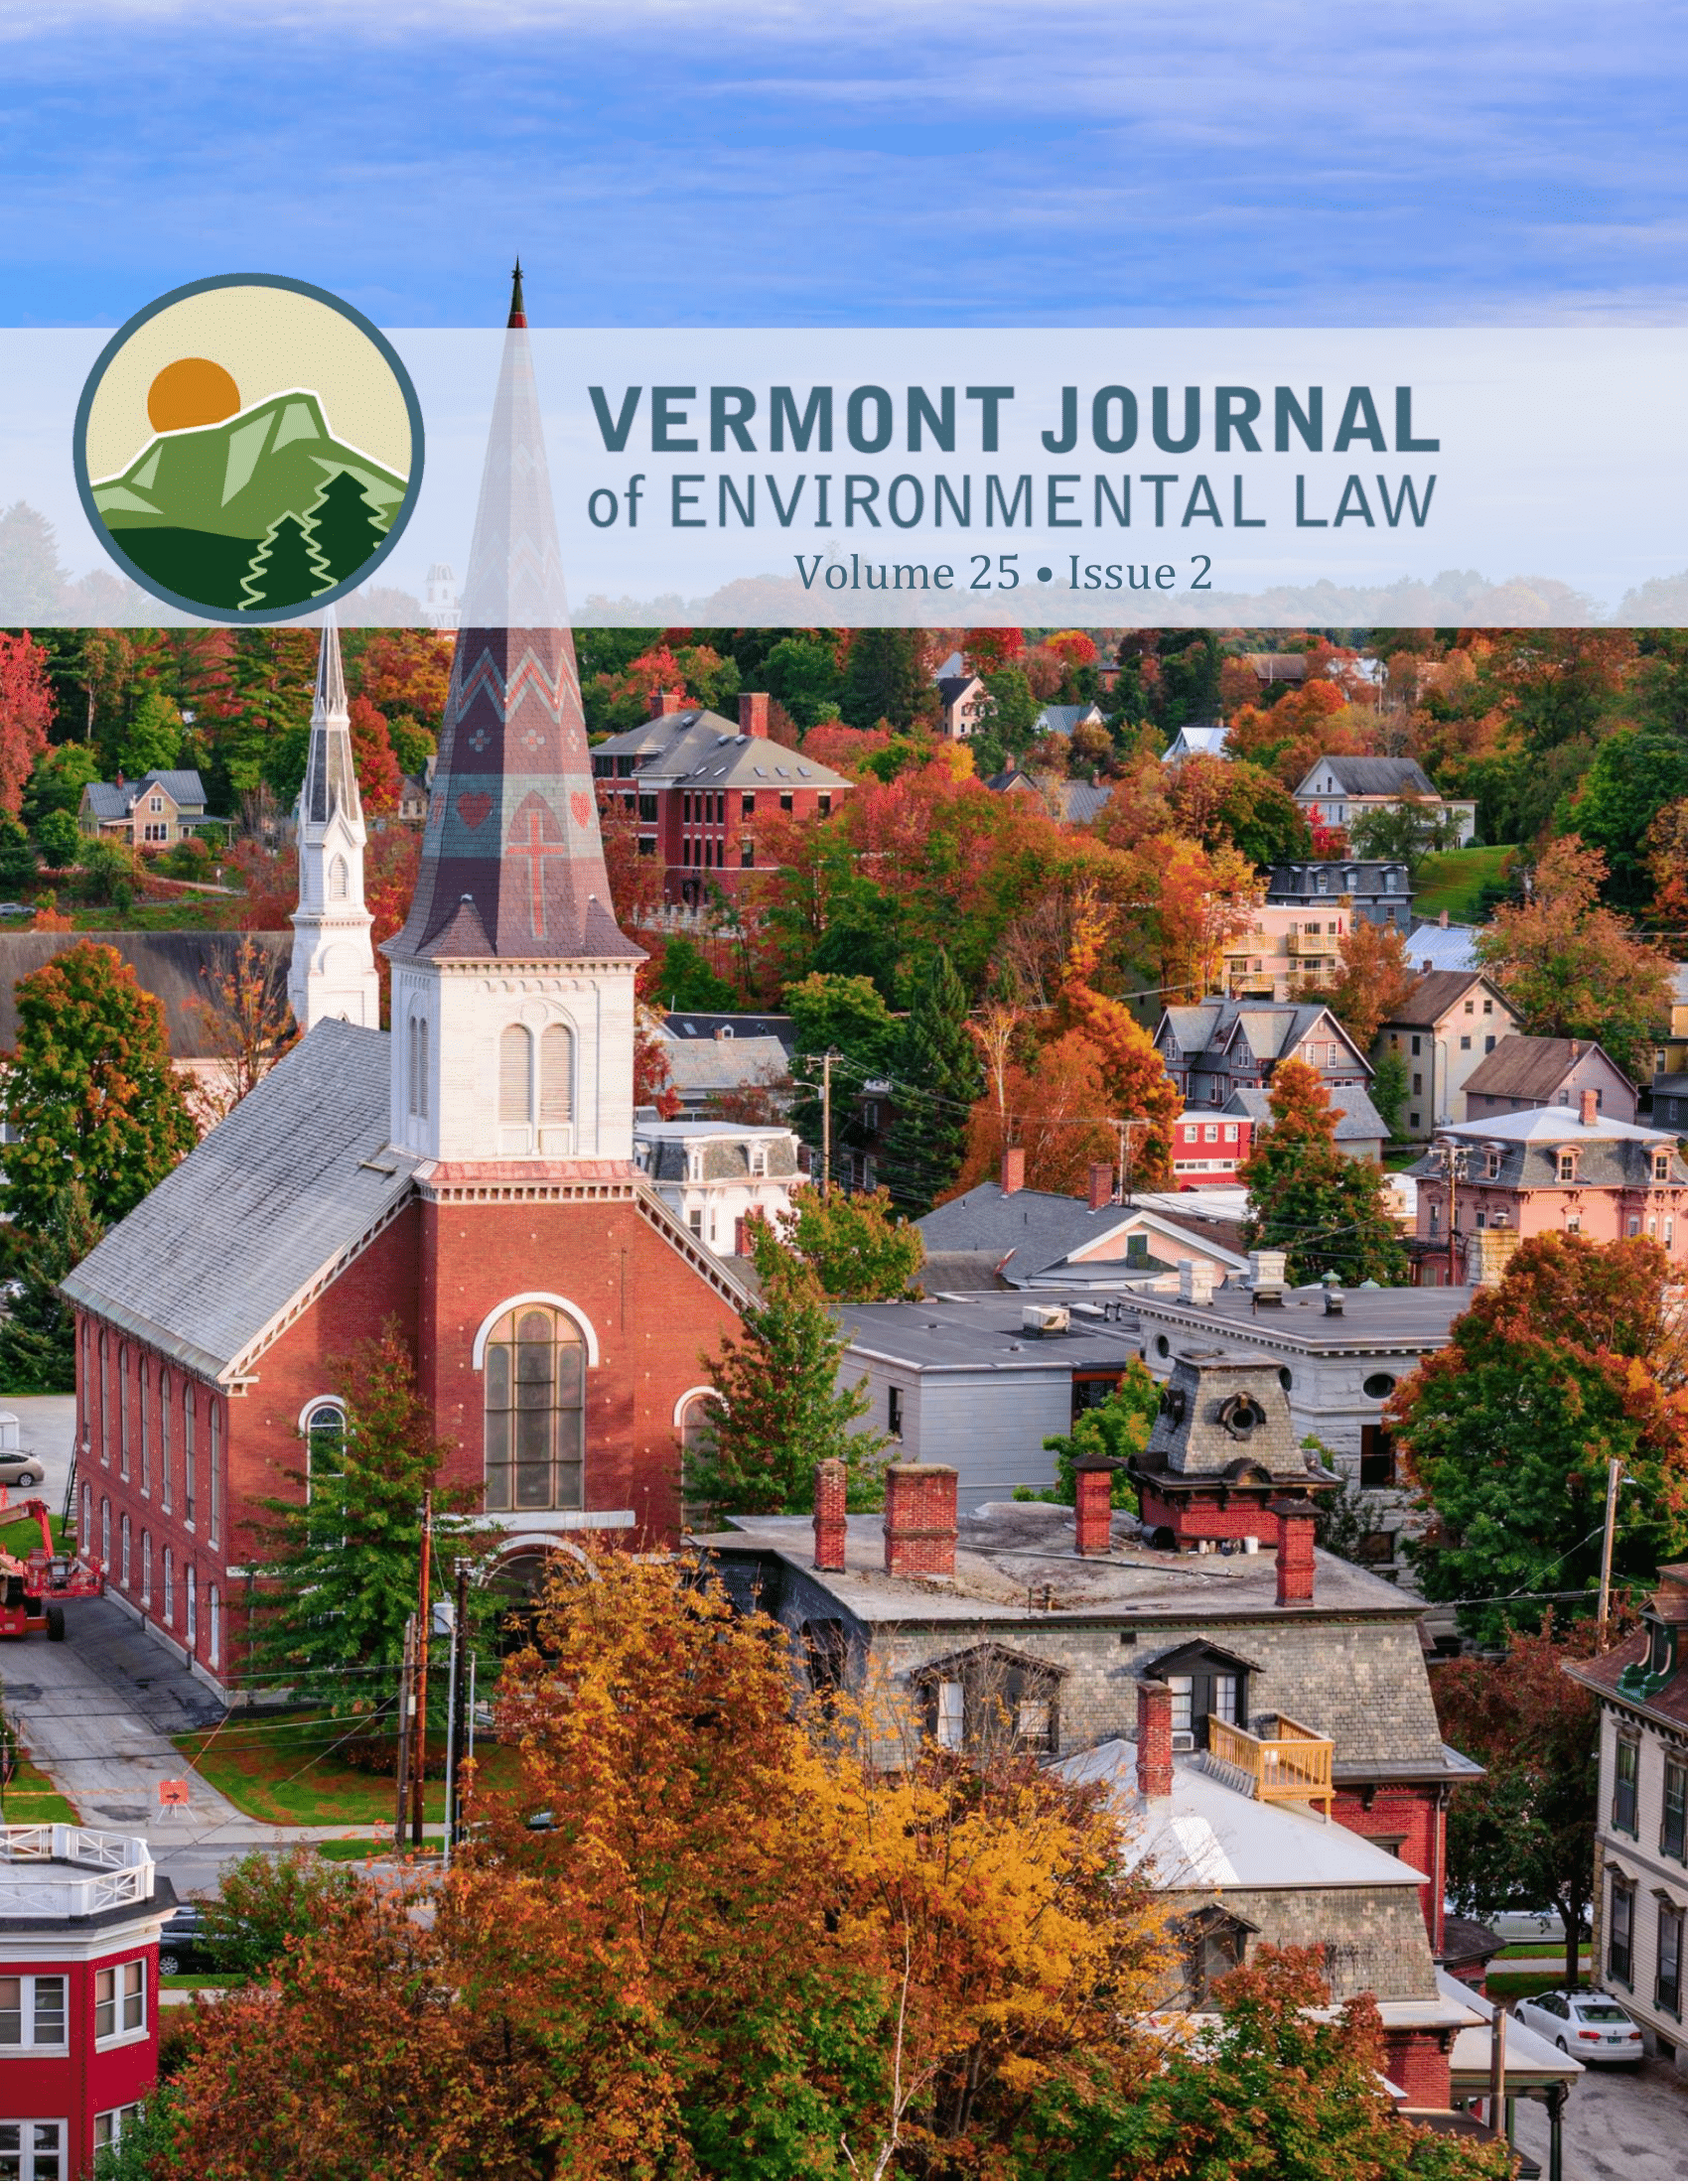 Published: Volume 25, Issue 2 of the Vermont Journal of Environmental Law